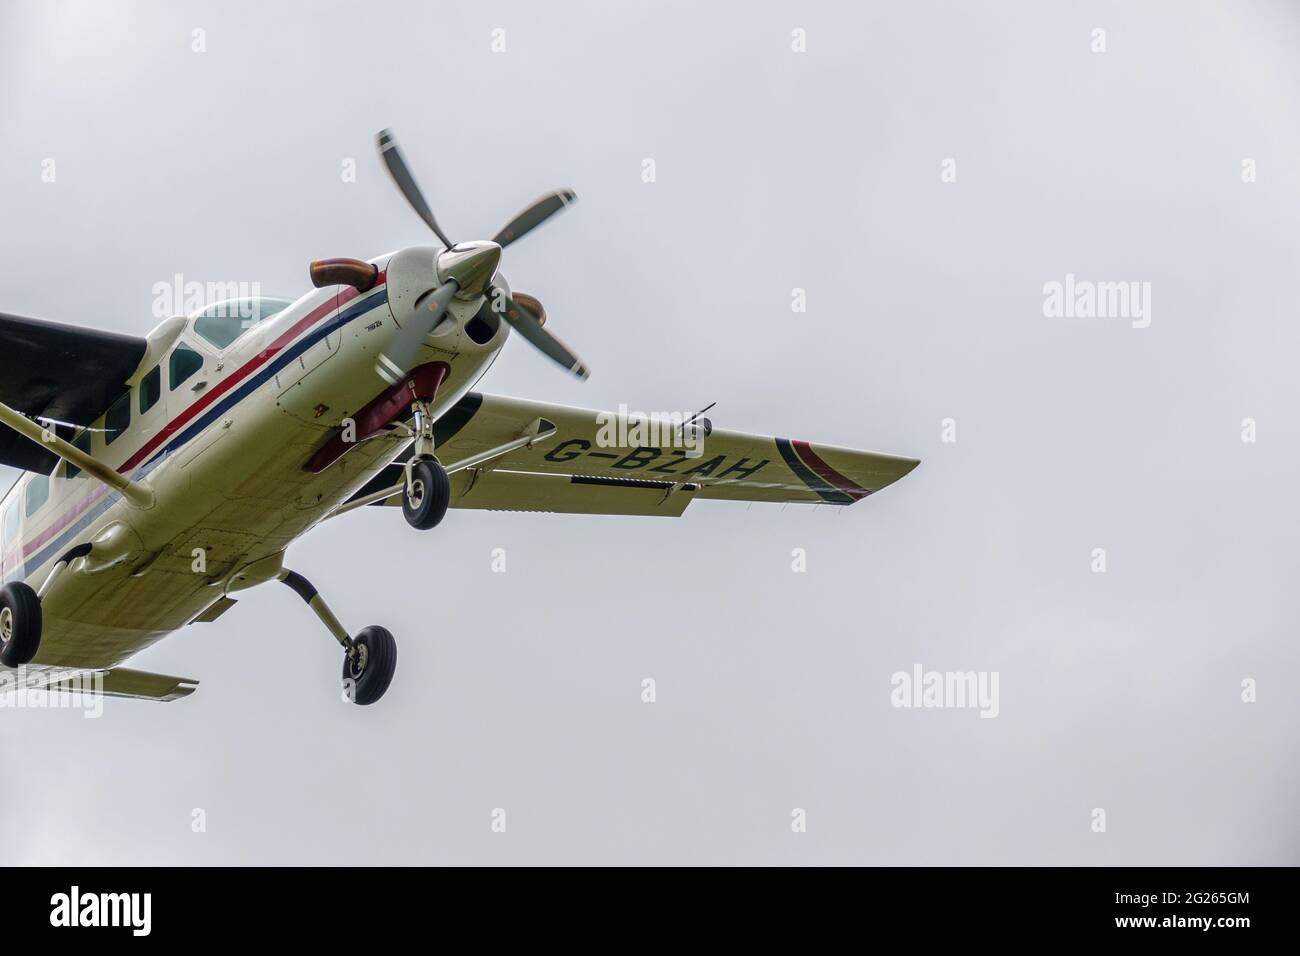 Cessna 208b Grand Caravan light aircraft returning to land after dropping the Red Devils parachute display team on a practice jump Stock Photo